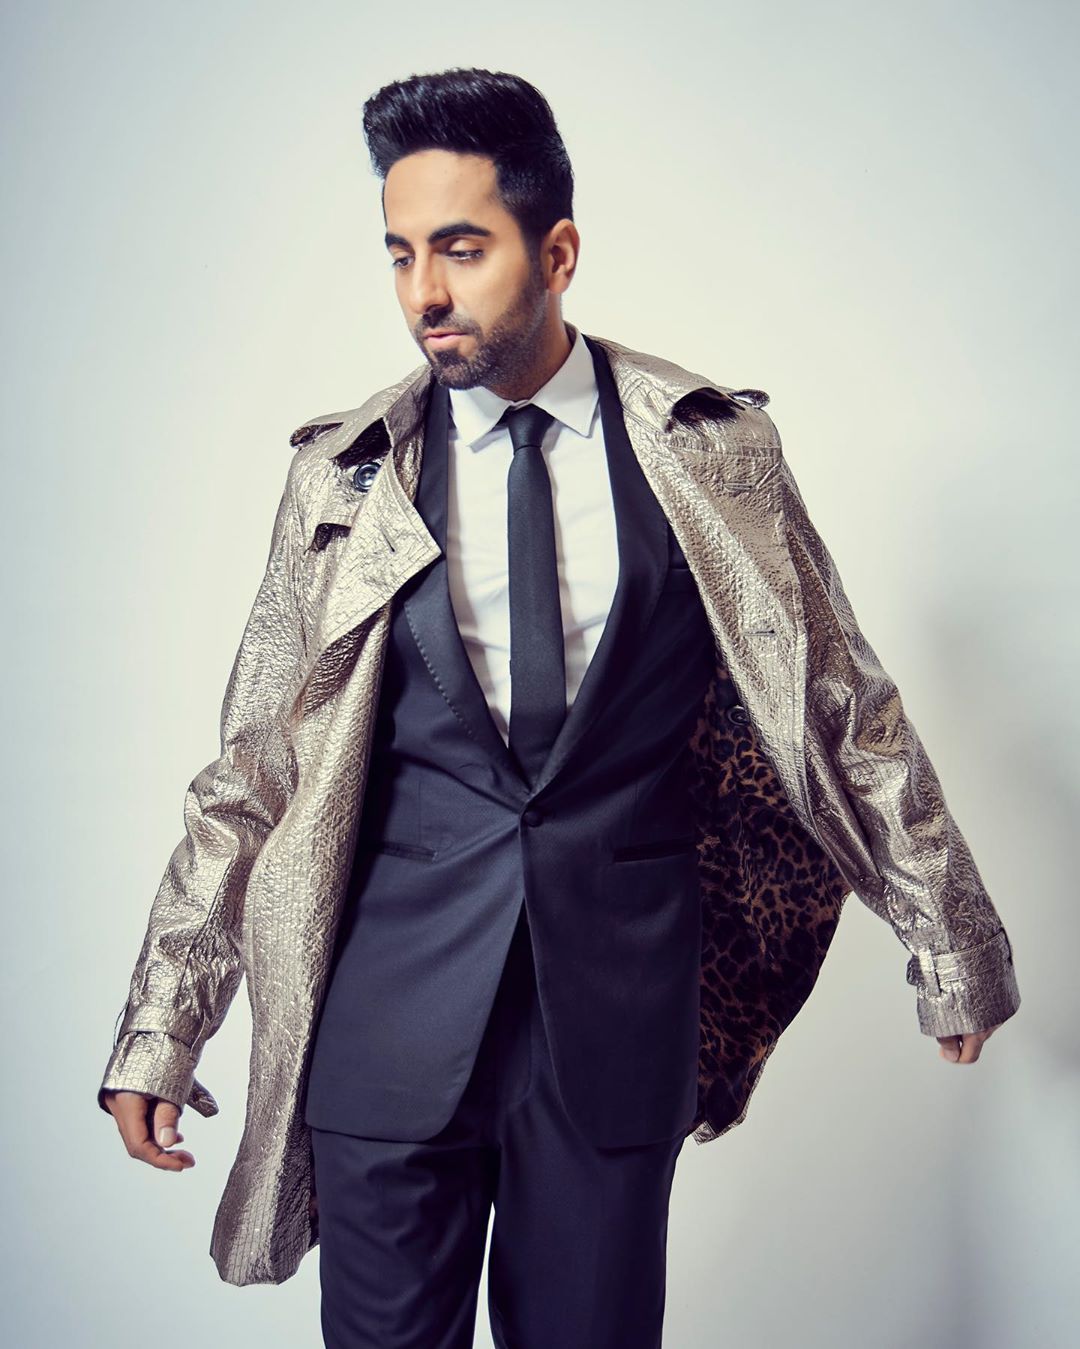 Ayushmann Wants To Add An Action Thriller With Rohit Shetty To His FIlmography Says, 'No Shame In Asking For Work'